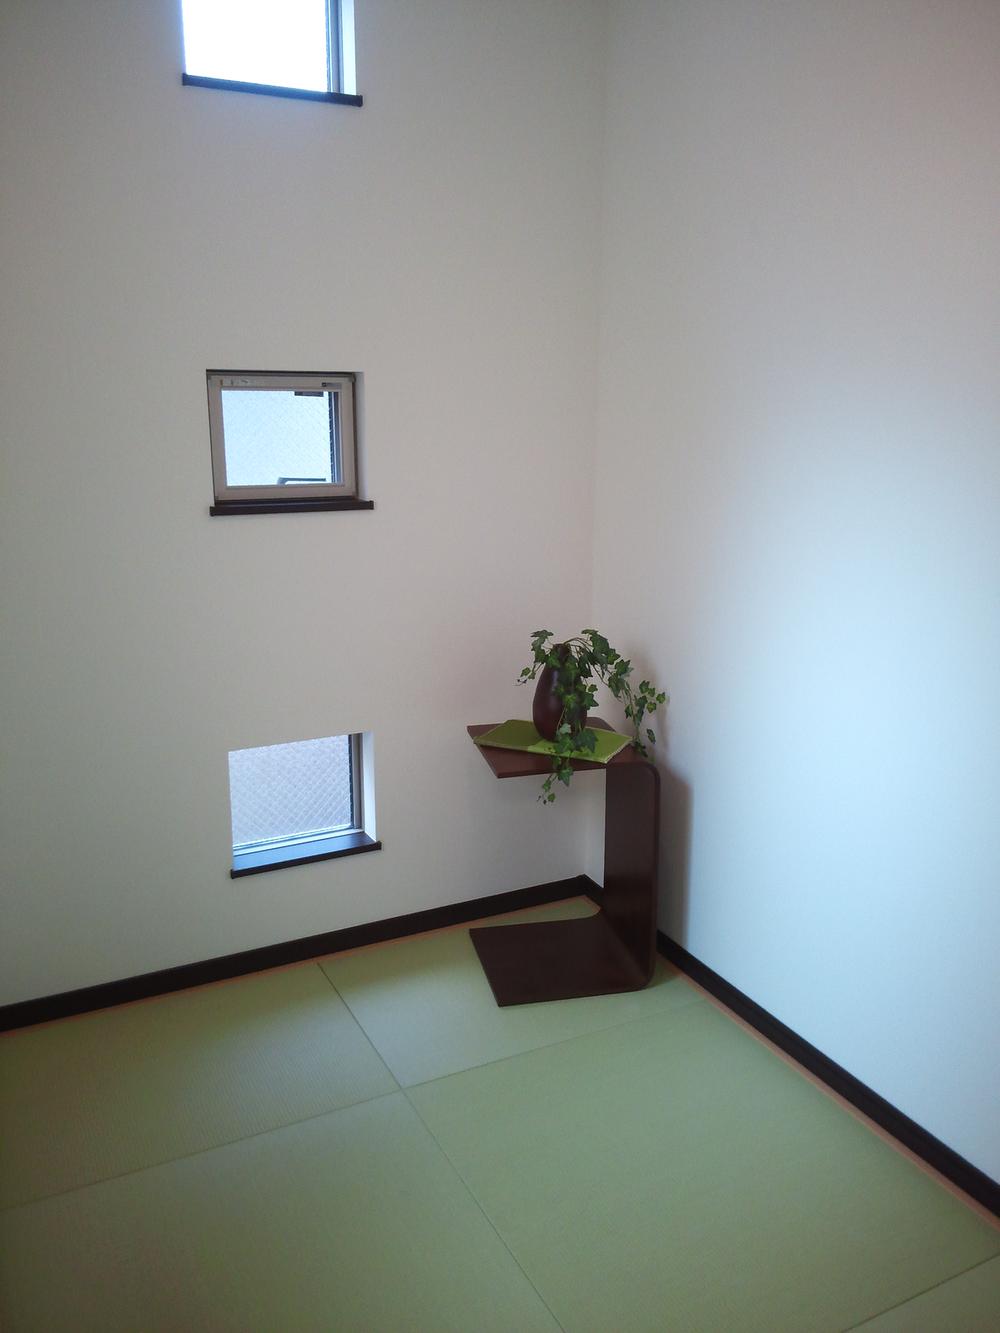 Non-living room. Is a Japanese-style fashionable in the part of the living room